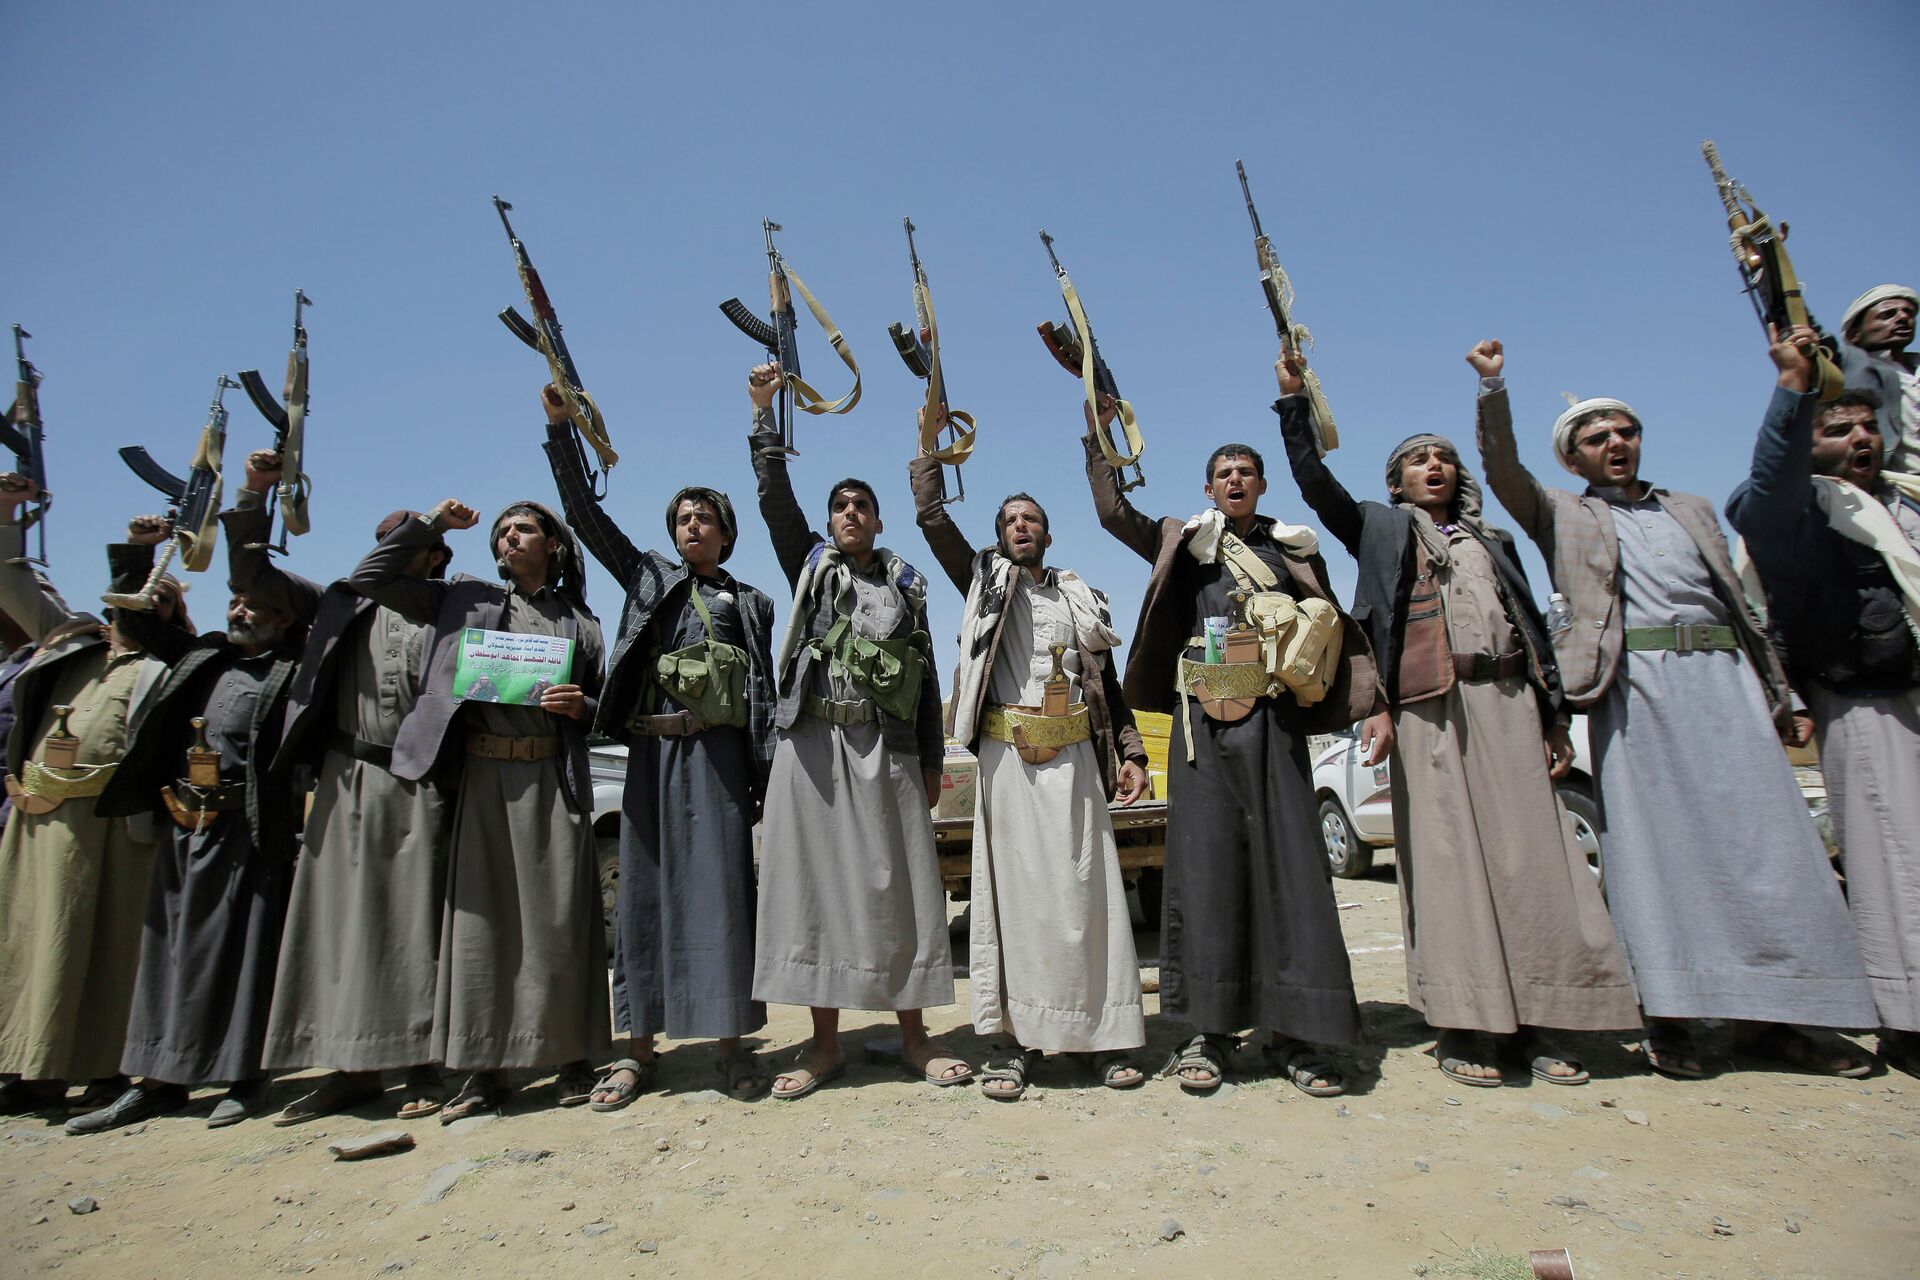 Shiite Houthi tribesmen hold their weapons as they chant slogans during a tribal gathering showing support for the Houthi movement, in Sanaa, Yemen, Saturday Sept. 21, 2019 - Sputnik International, 1920, 13.07.2022